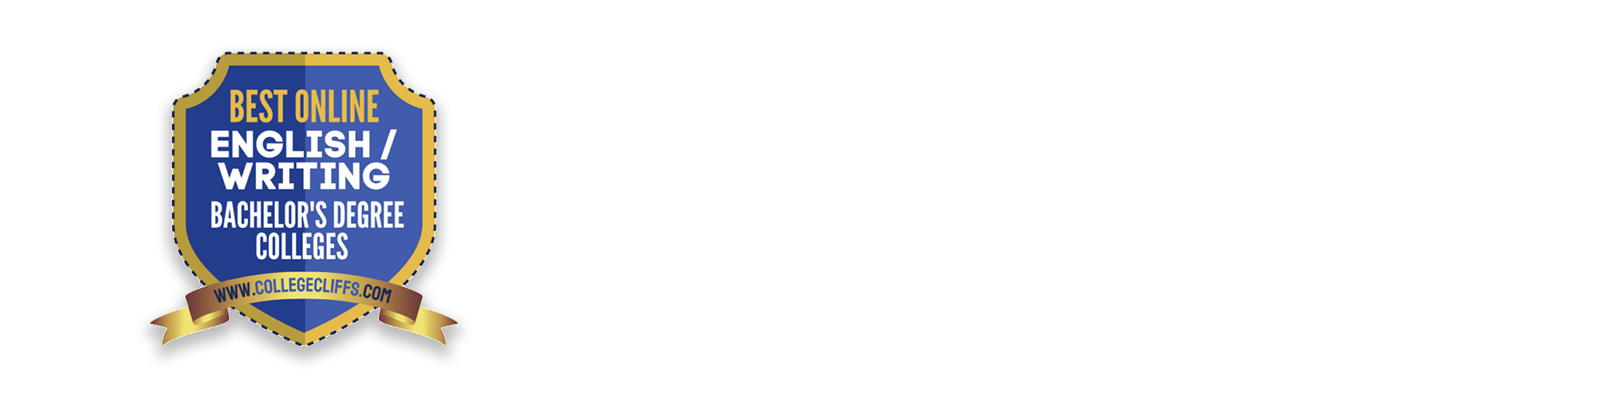 College Cliffs Ranks Nicholls One Of The Best Online Bachelor's In English/Writing Degree Colleges Of 2021